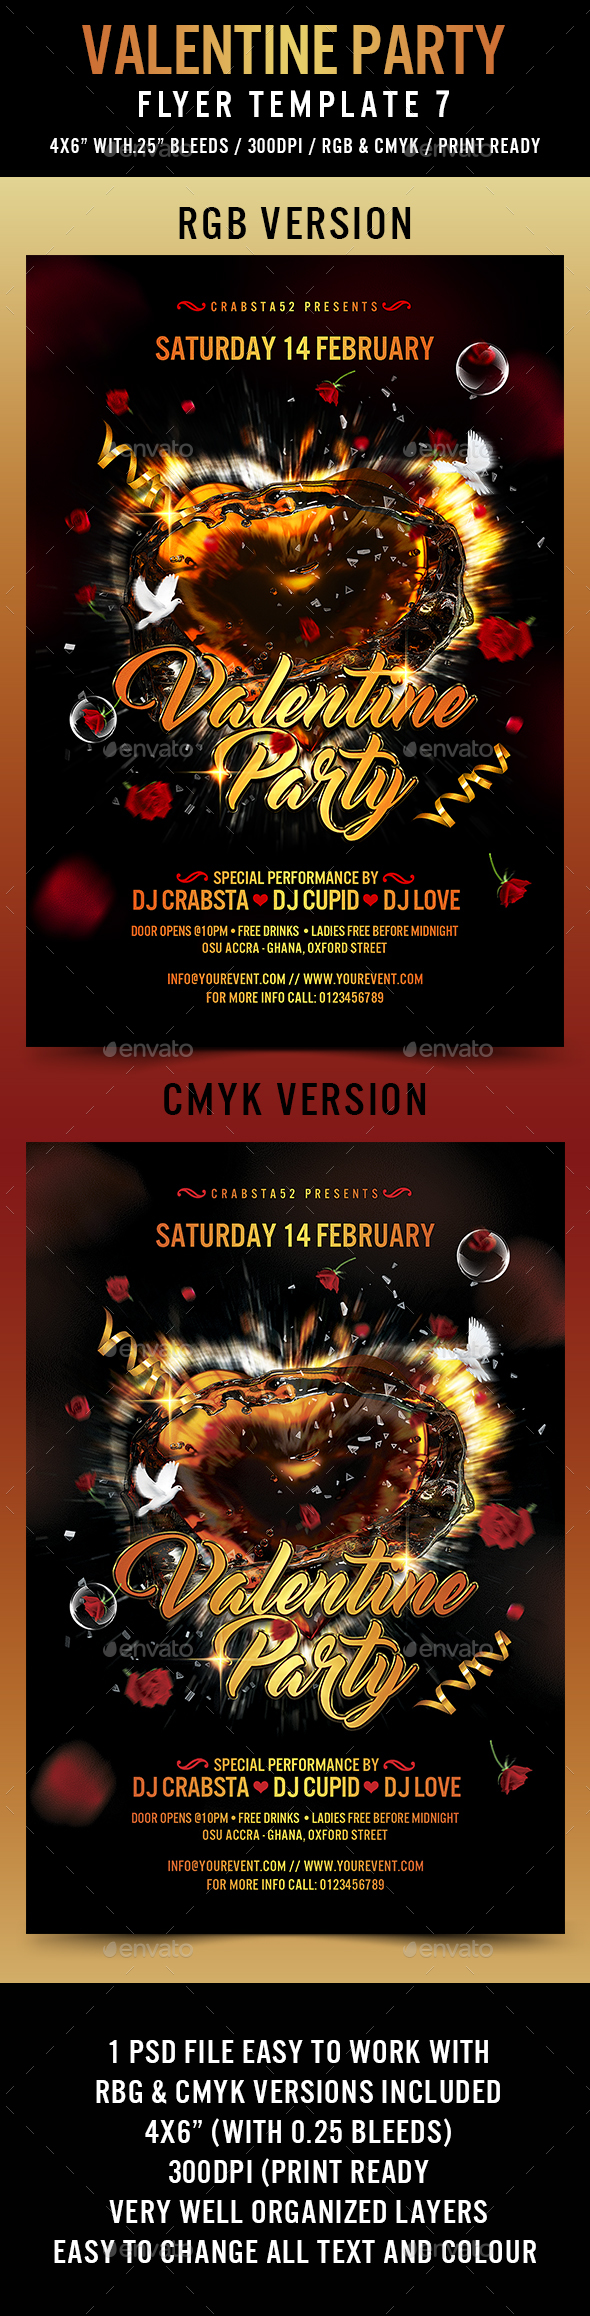 Valentine Party Flyer Template 7